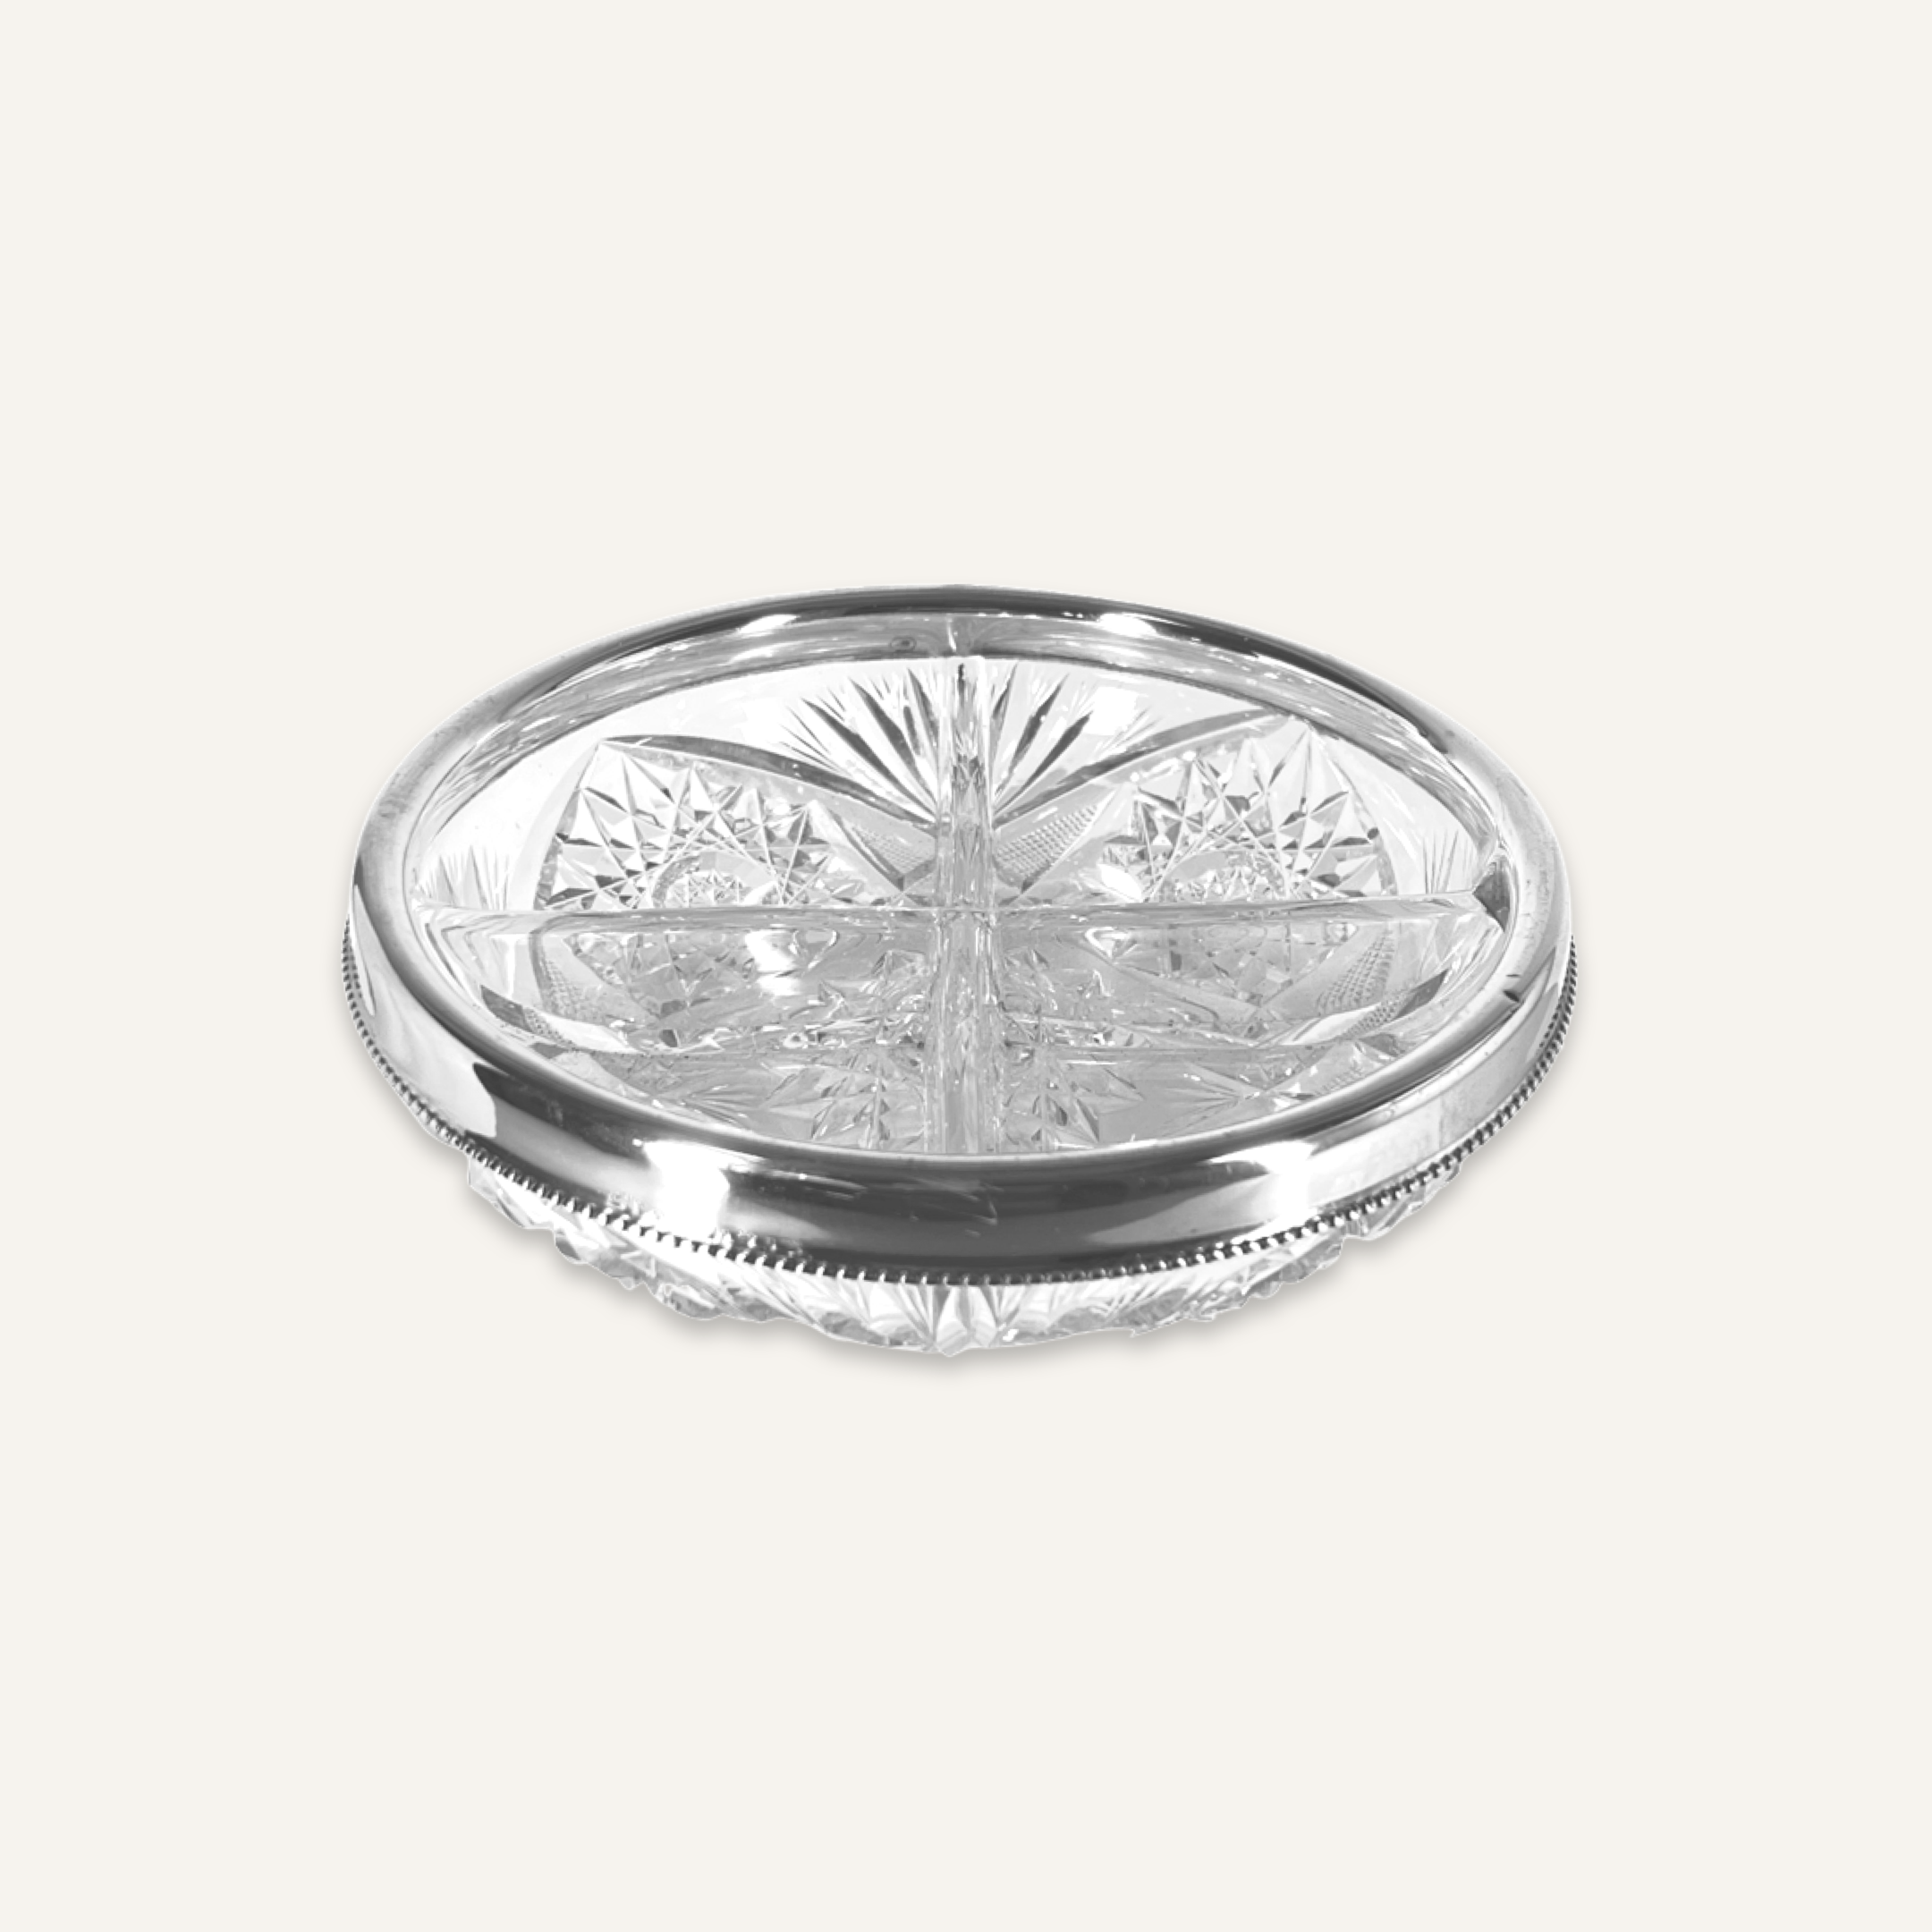 American Brilliant Cut Crystal Divided Dish with Silver Ring